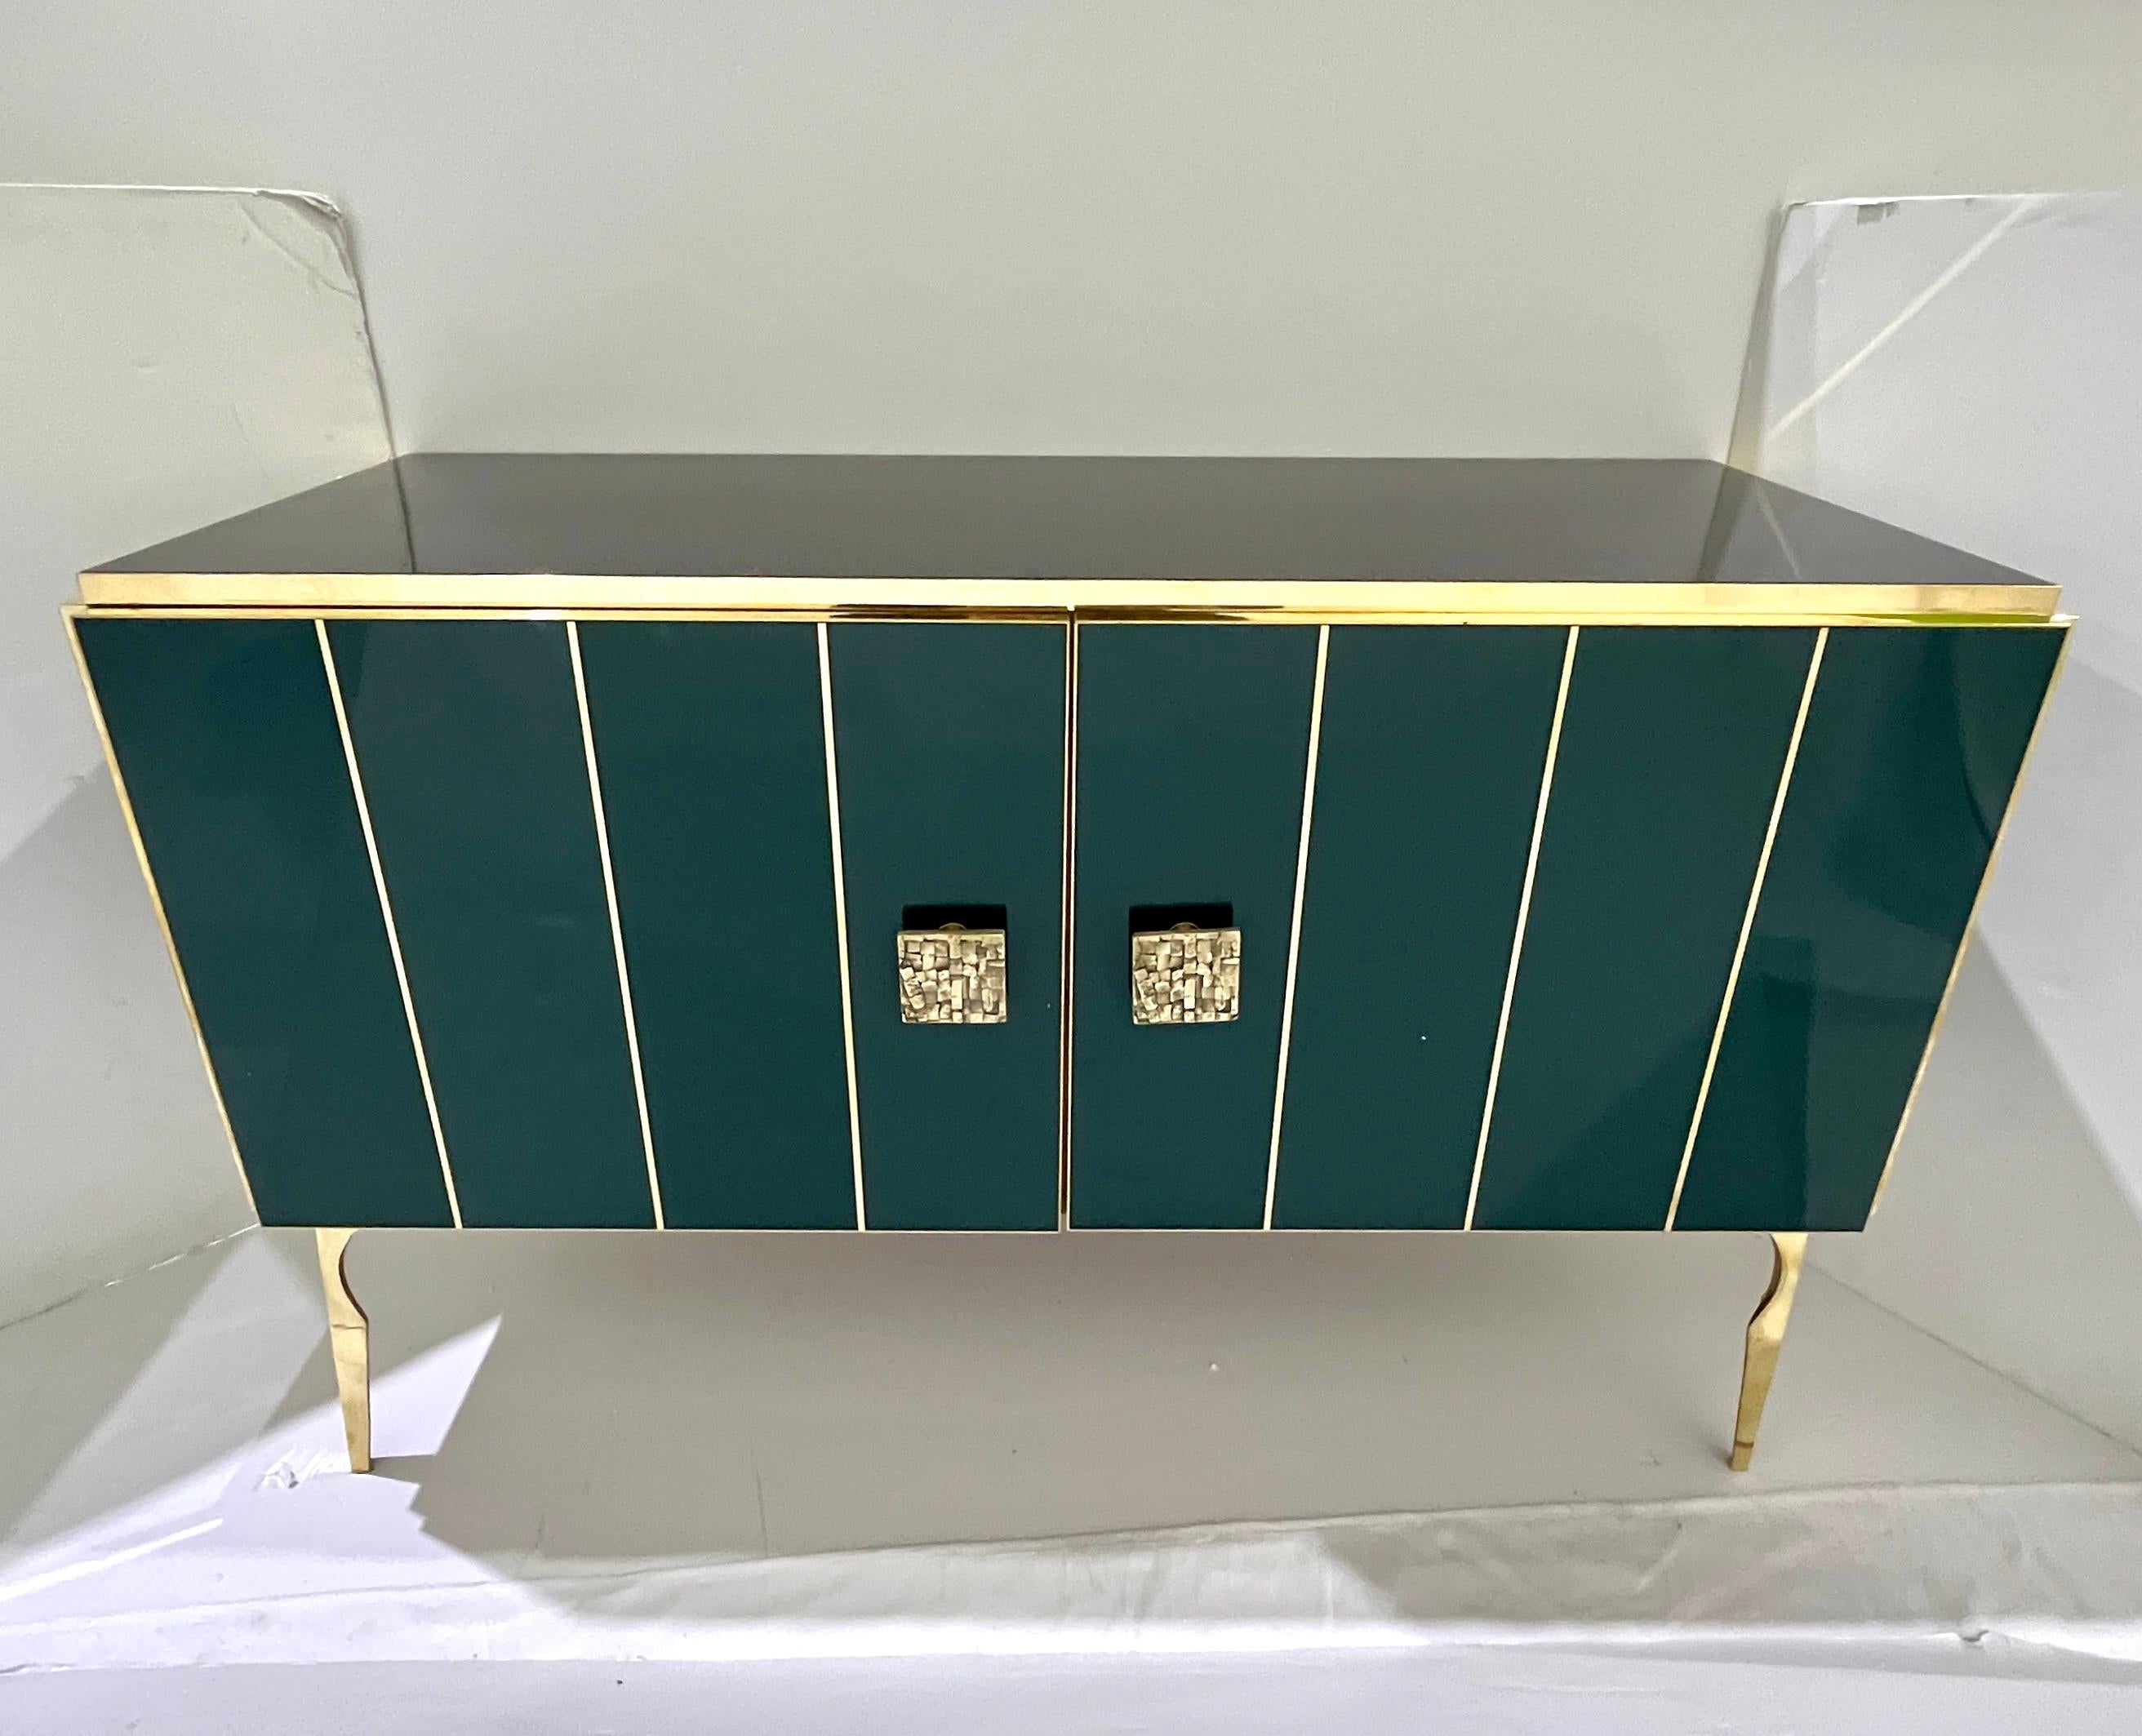 Bring glamour to your interior with this bespoke customizable modern 2-door cabinet, entirely handcrafted in Italy, with a Hollywood Regency feel. The surround is decorated with art glass in a striking hunter bottle green color, striped vertically